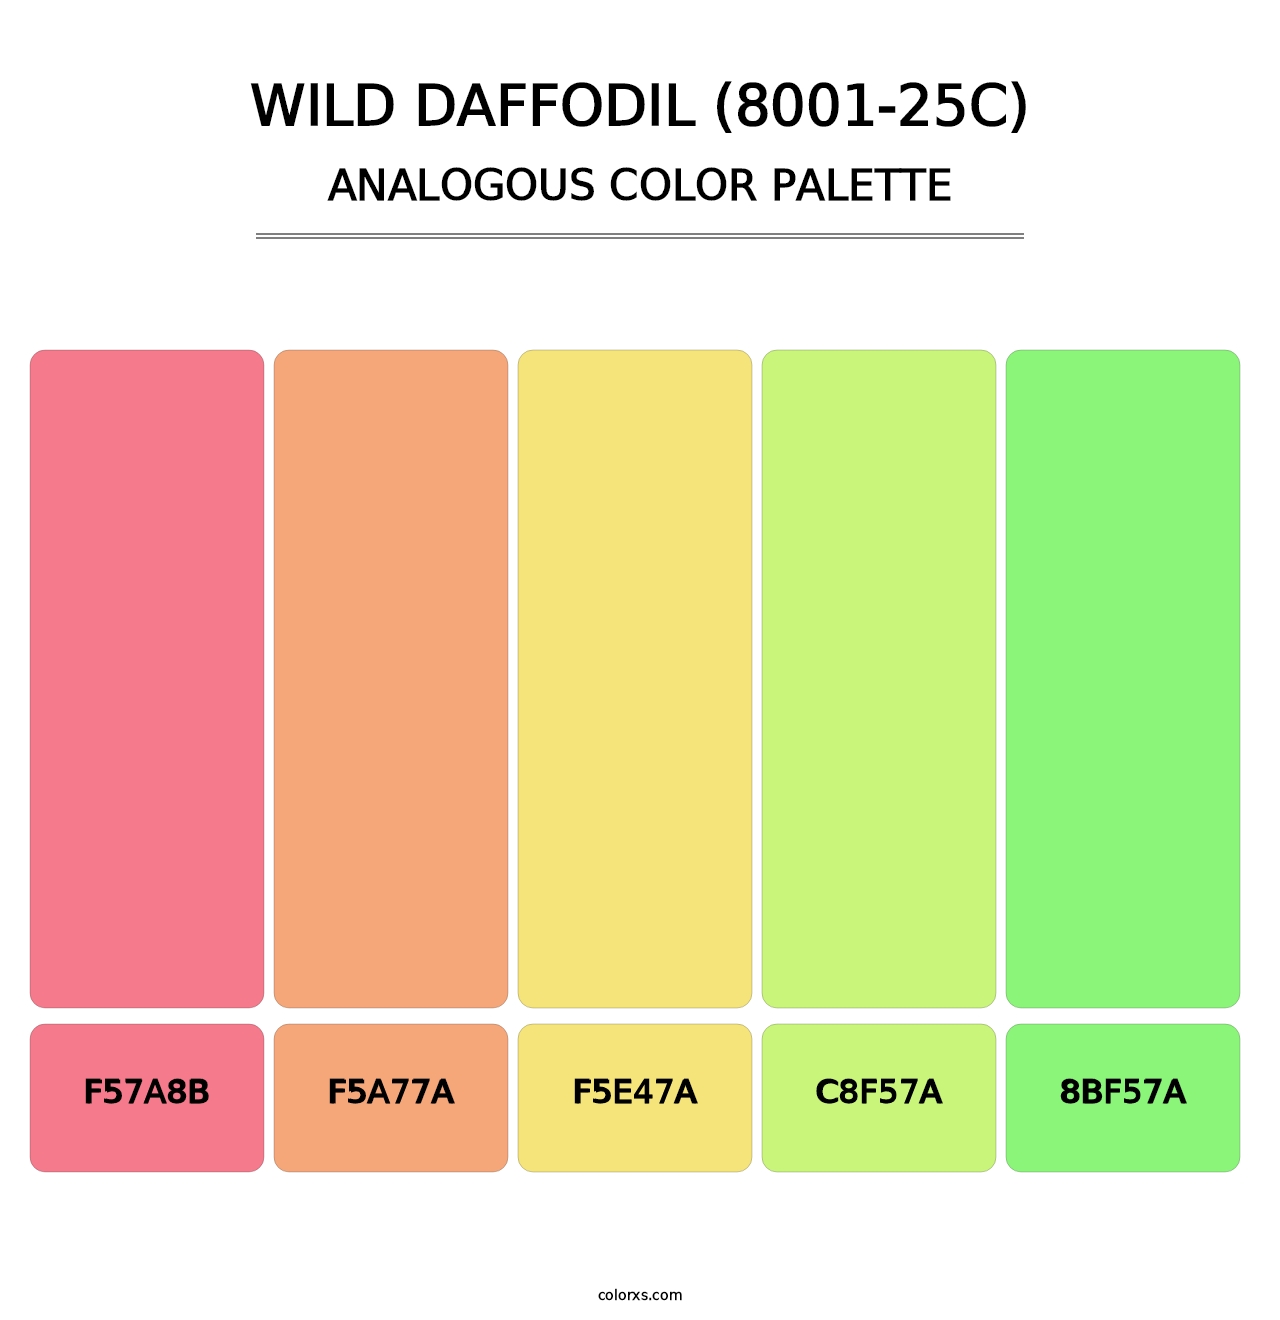 Wild Daffodil (8001-25C) - Analogous Color Palette